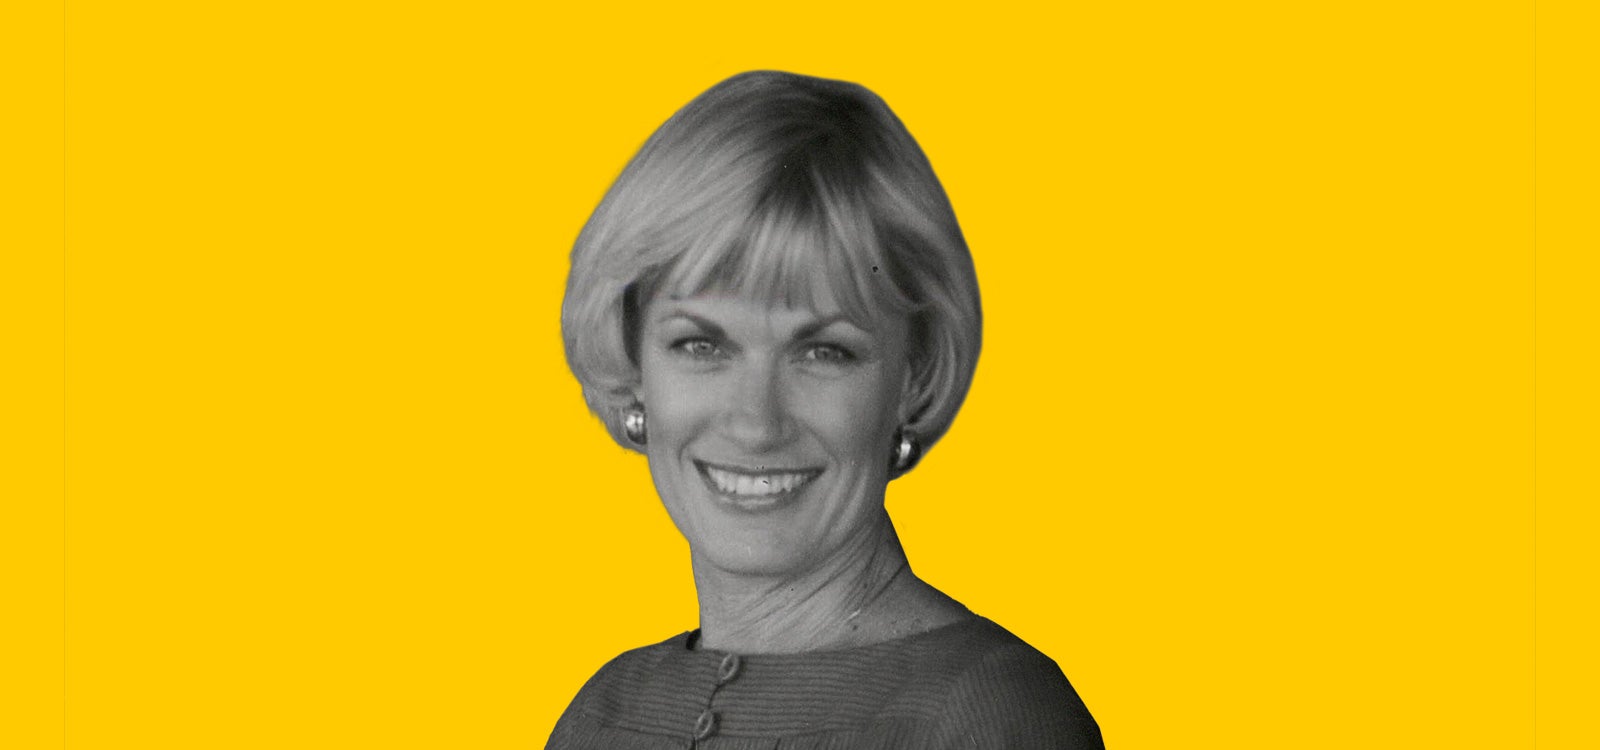 Cut-out black and white profile photo of USC athletics administrator Barbara Hedges with yellow background